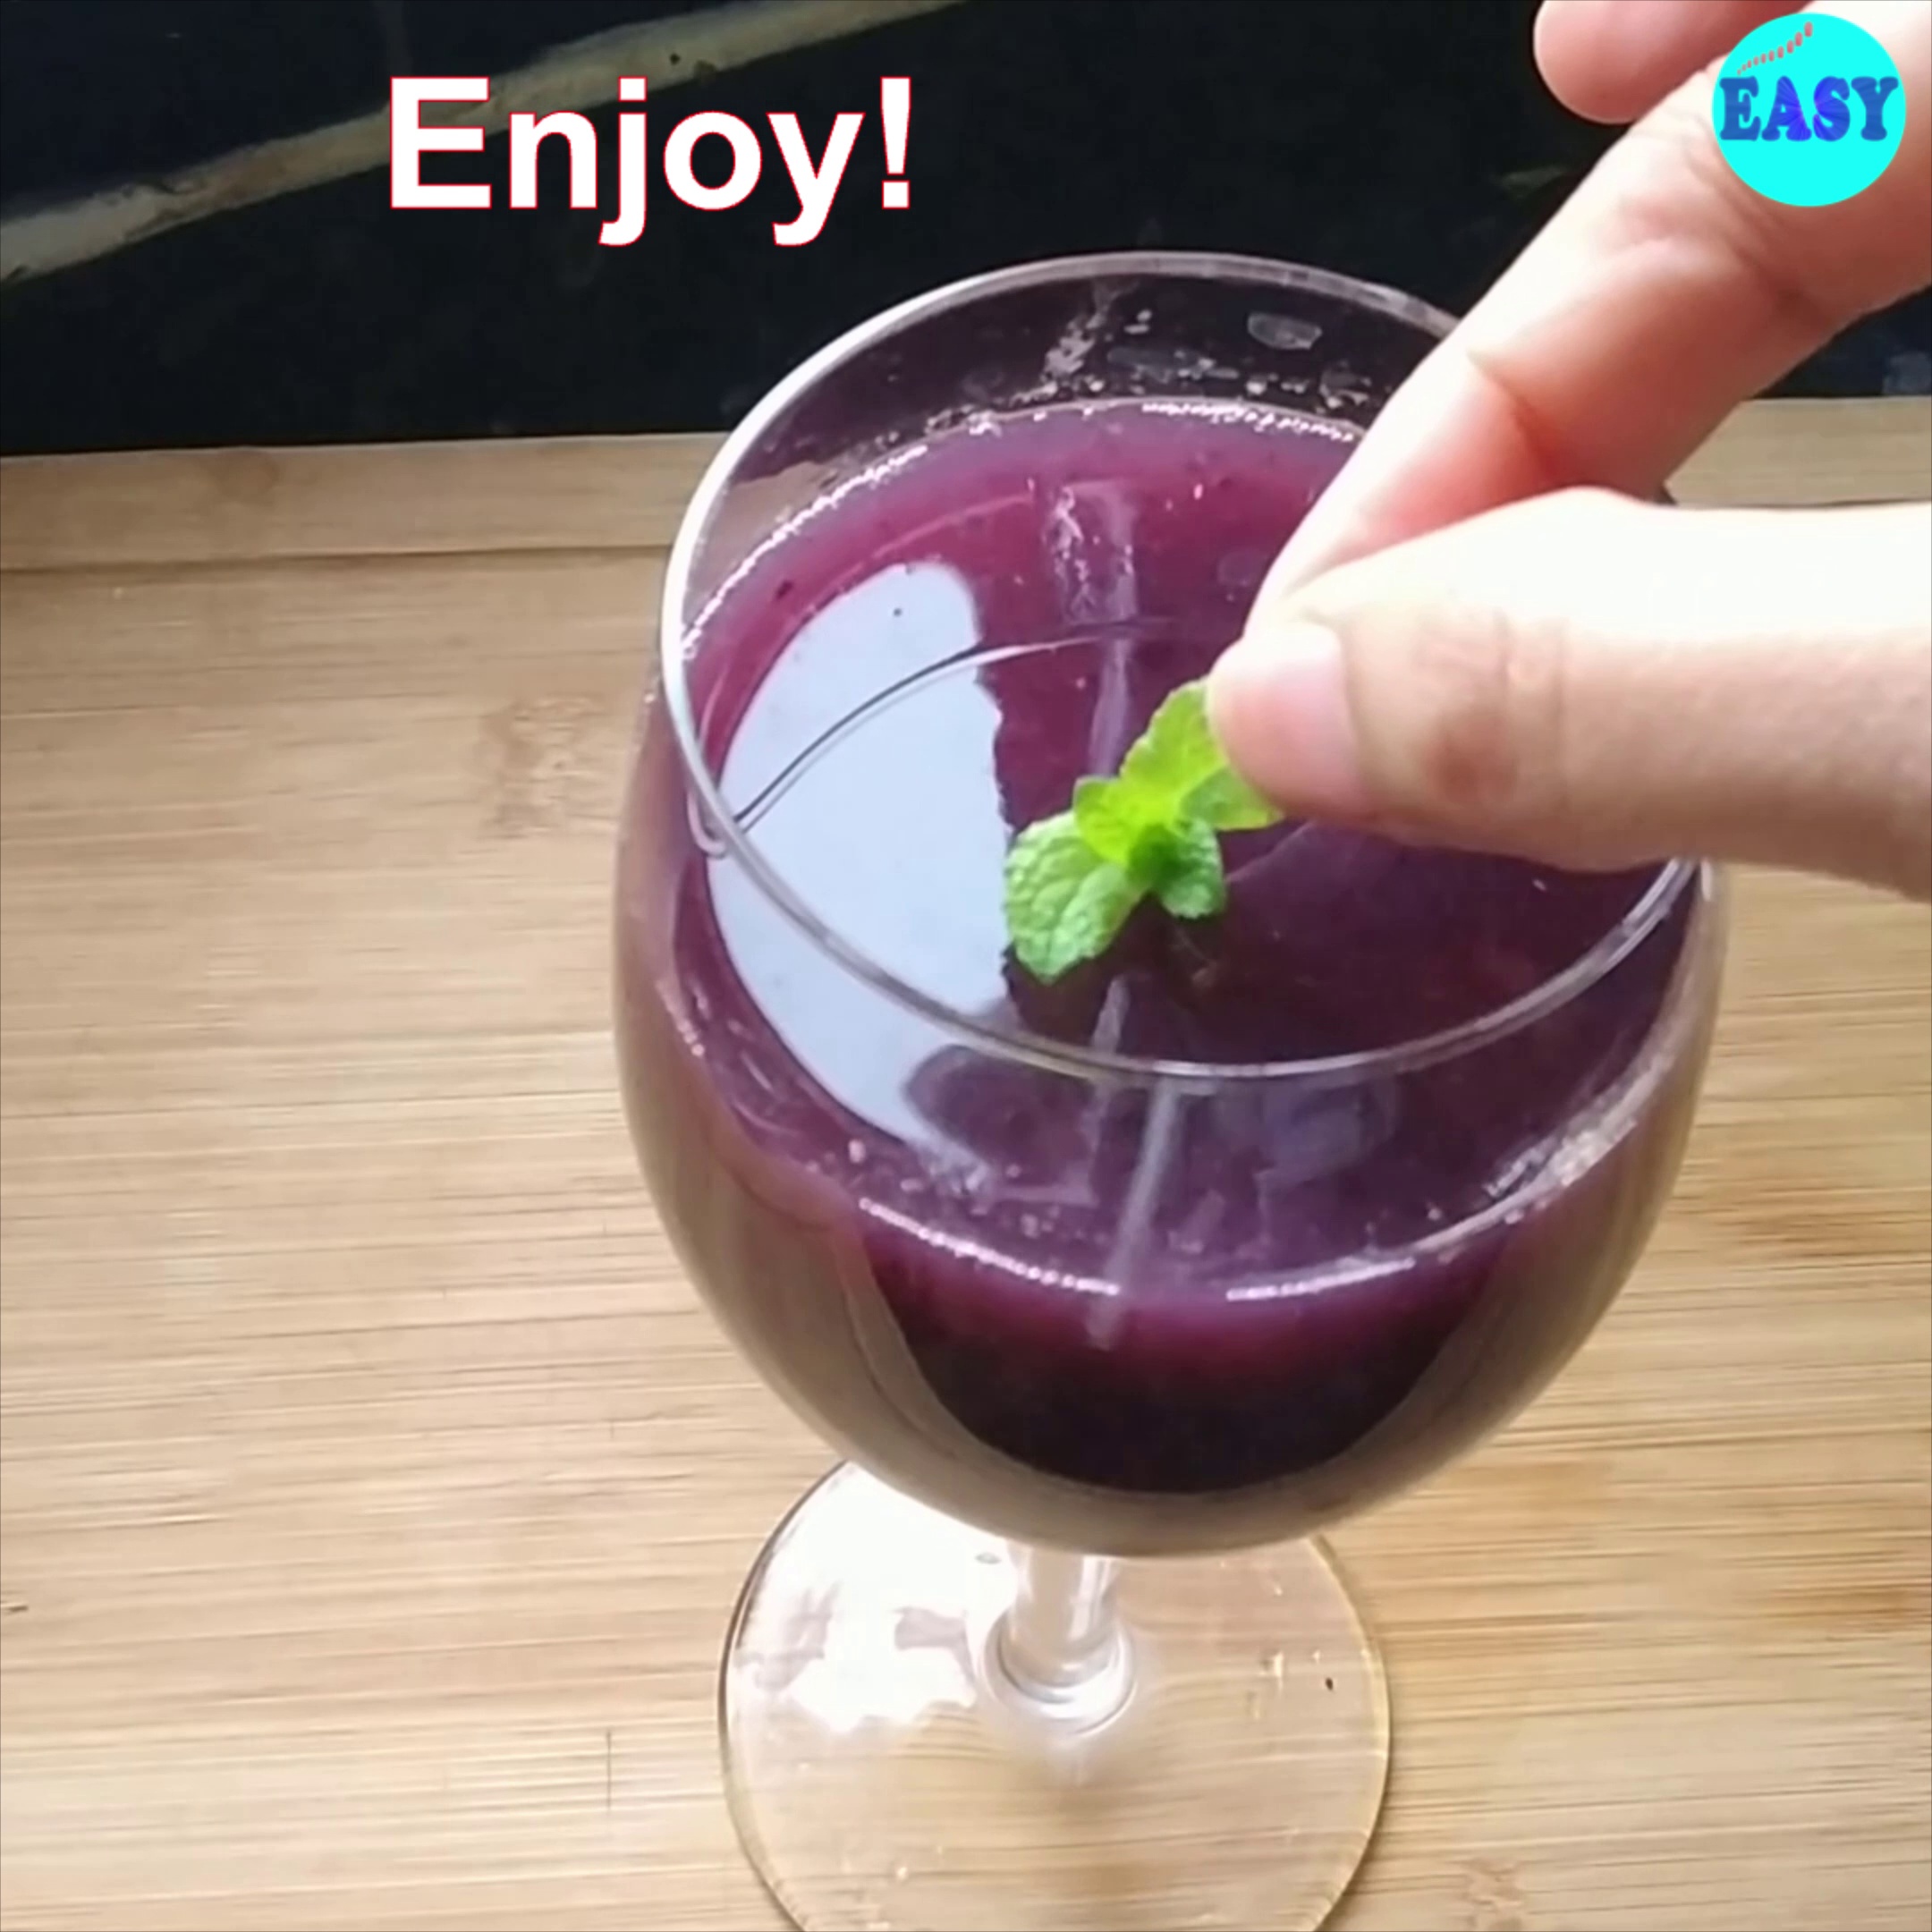 Step 4 - I garnished it with fresh mint leaves, but that is optional, you can also use lemon wedges if you want.